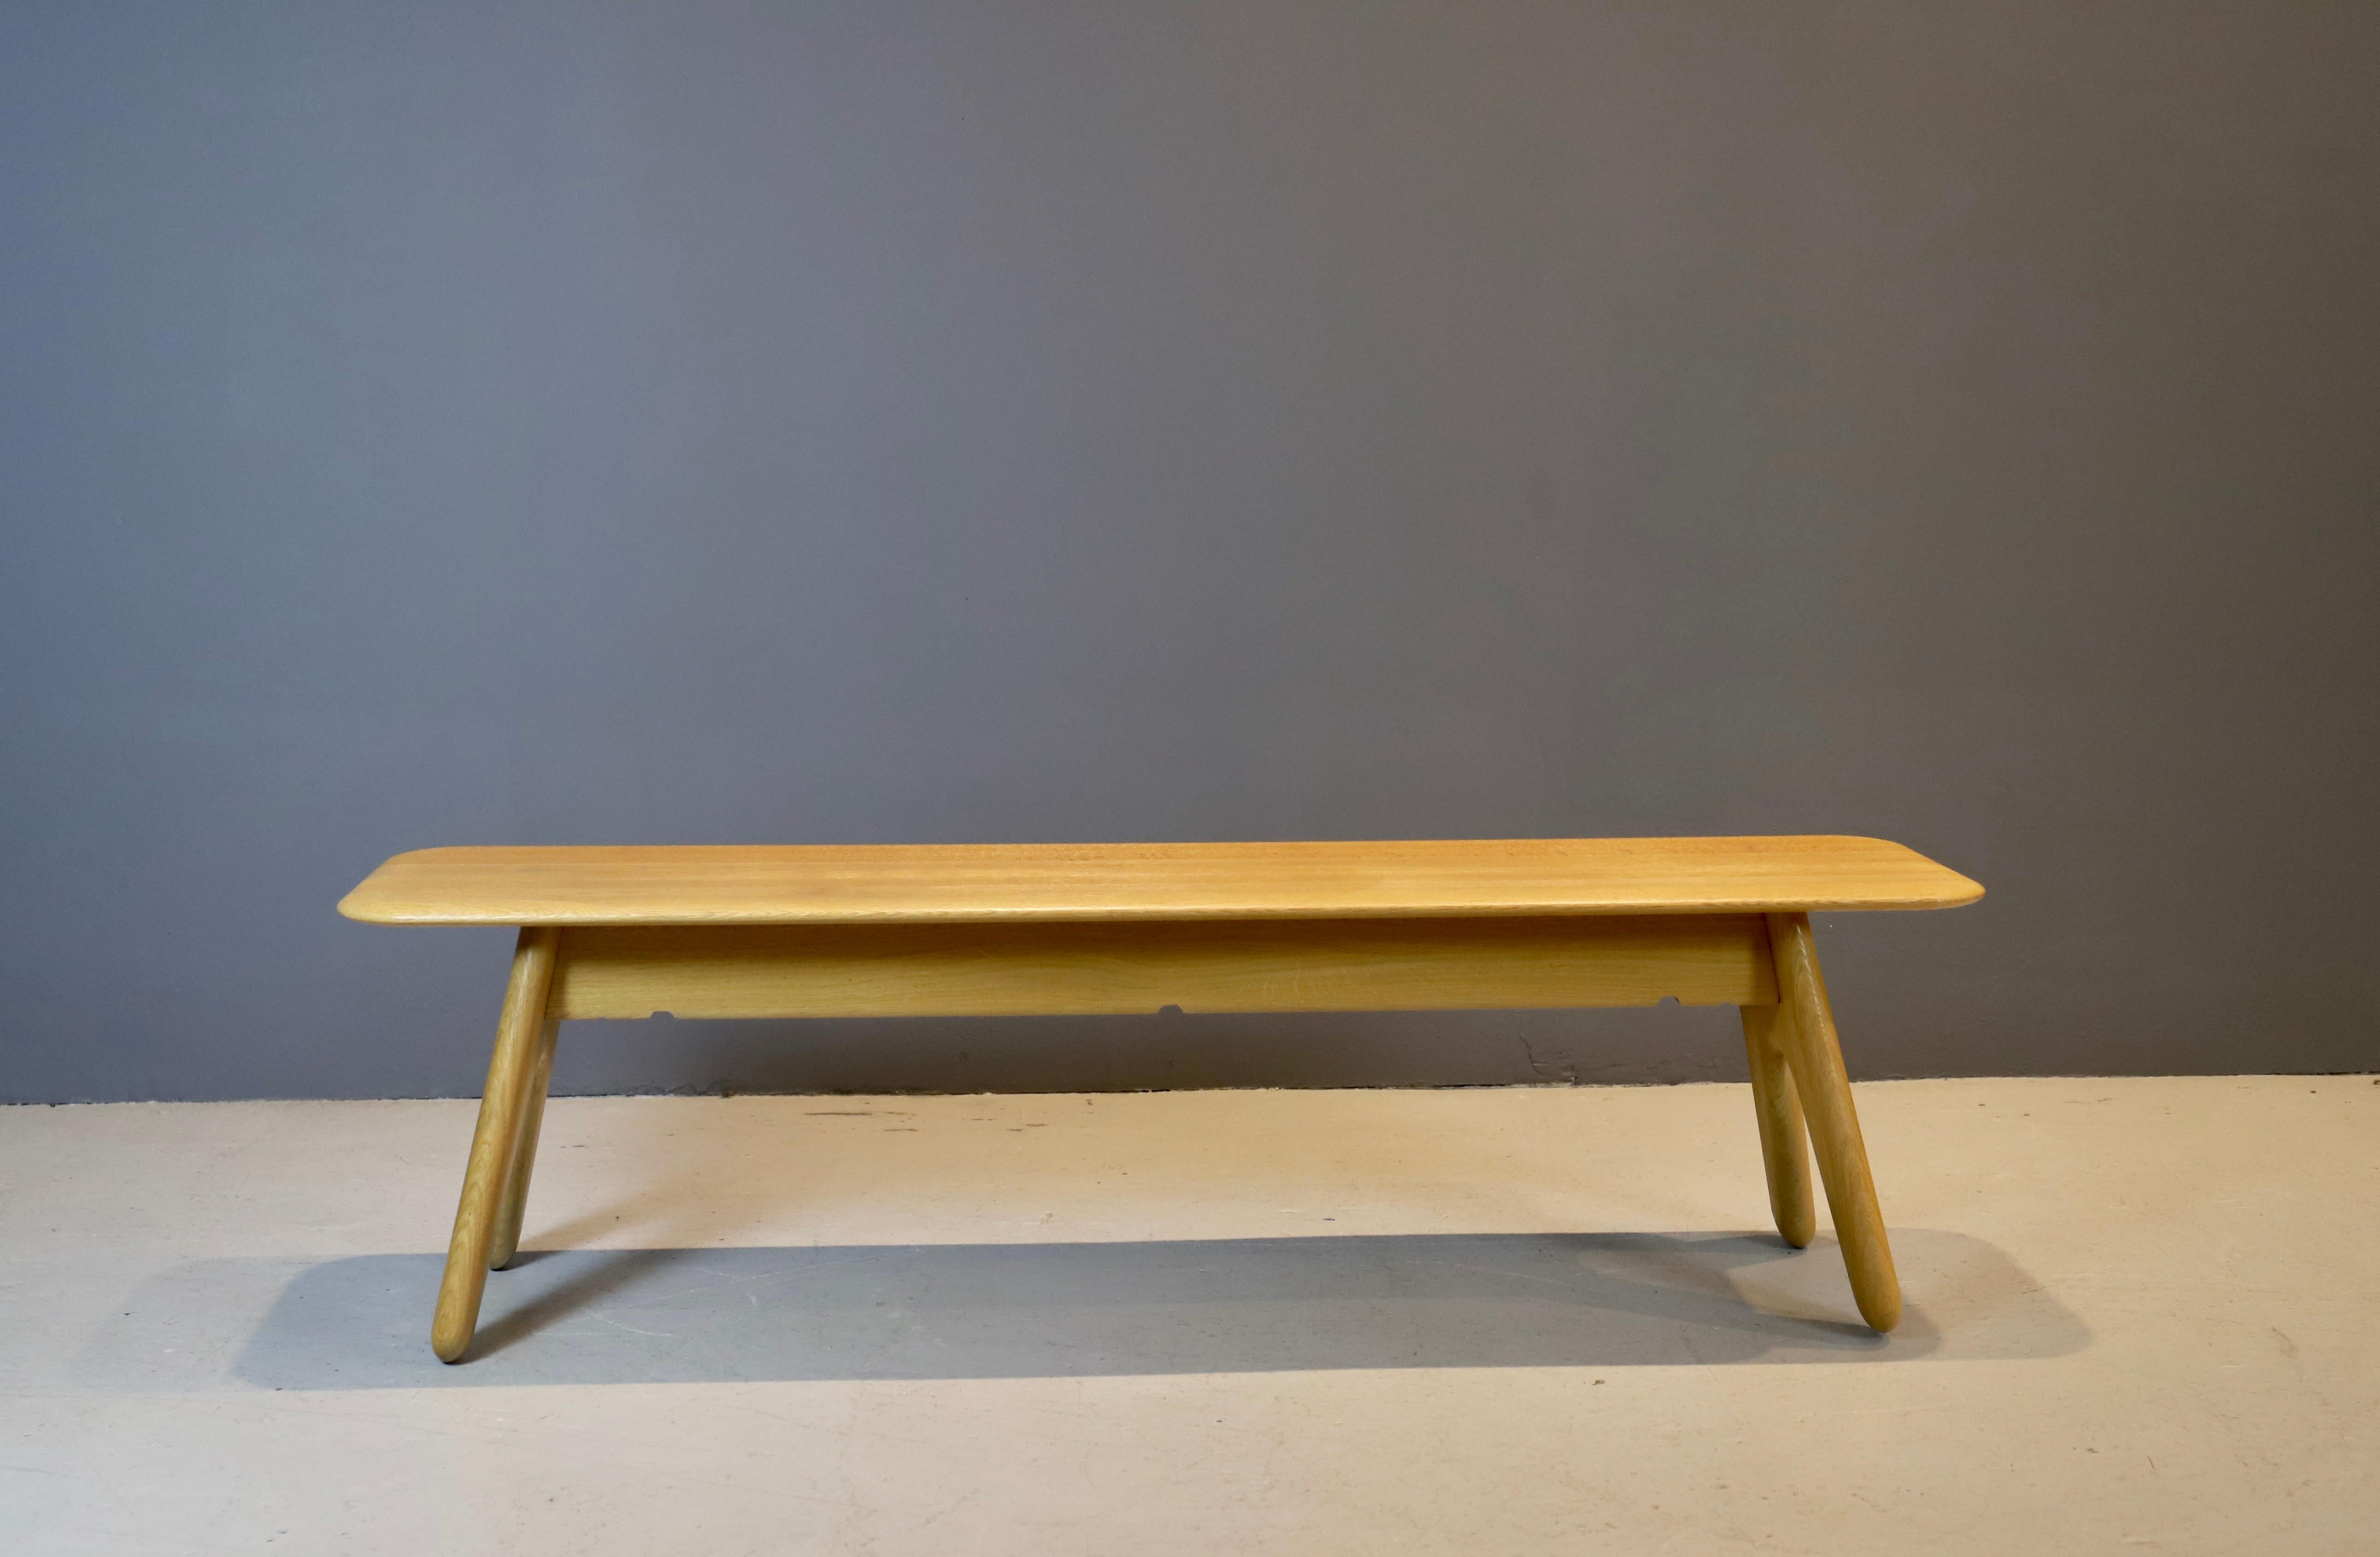 Organic form slab bench designed by Tom Dixon, circa 2000 and made of solid cerused oak.
Stamped underneath.
No longer in production.